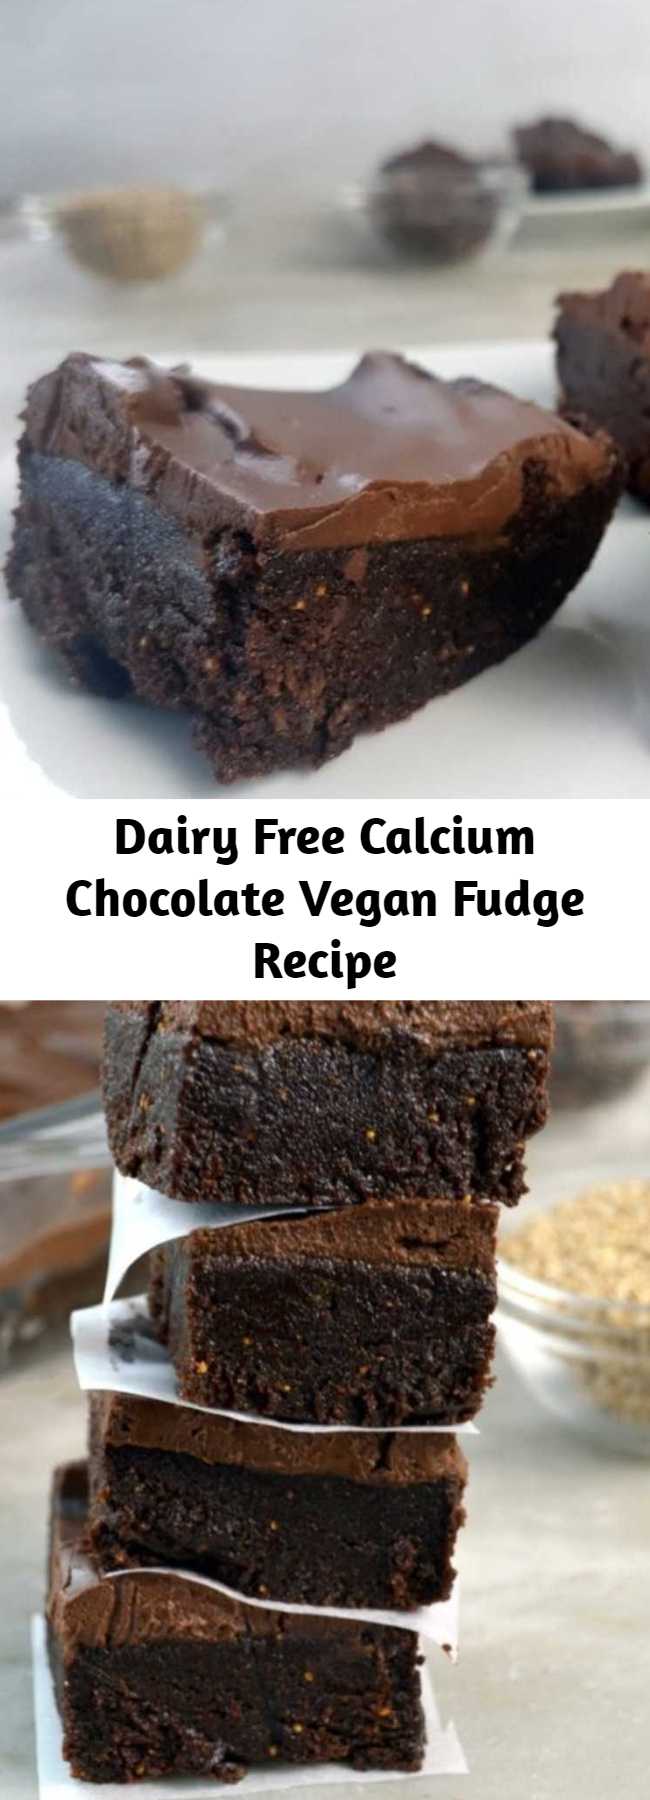 Dairy Free Calcium Chocolate Vegan Fudge Recipe - One square of this fudge has about 35% of and adults RDA for calcium. It is vegan, plant-based, gluten free, dairy free, paleo and high in protein and magnesium. It's easy to get calcium from plant based foods and a vegan diet if you incorporate some high calcium plant sources. #vegan #healthy #veganrecipe #calcium #dairyfree #fudge